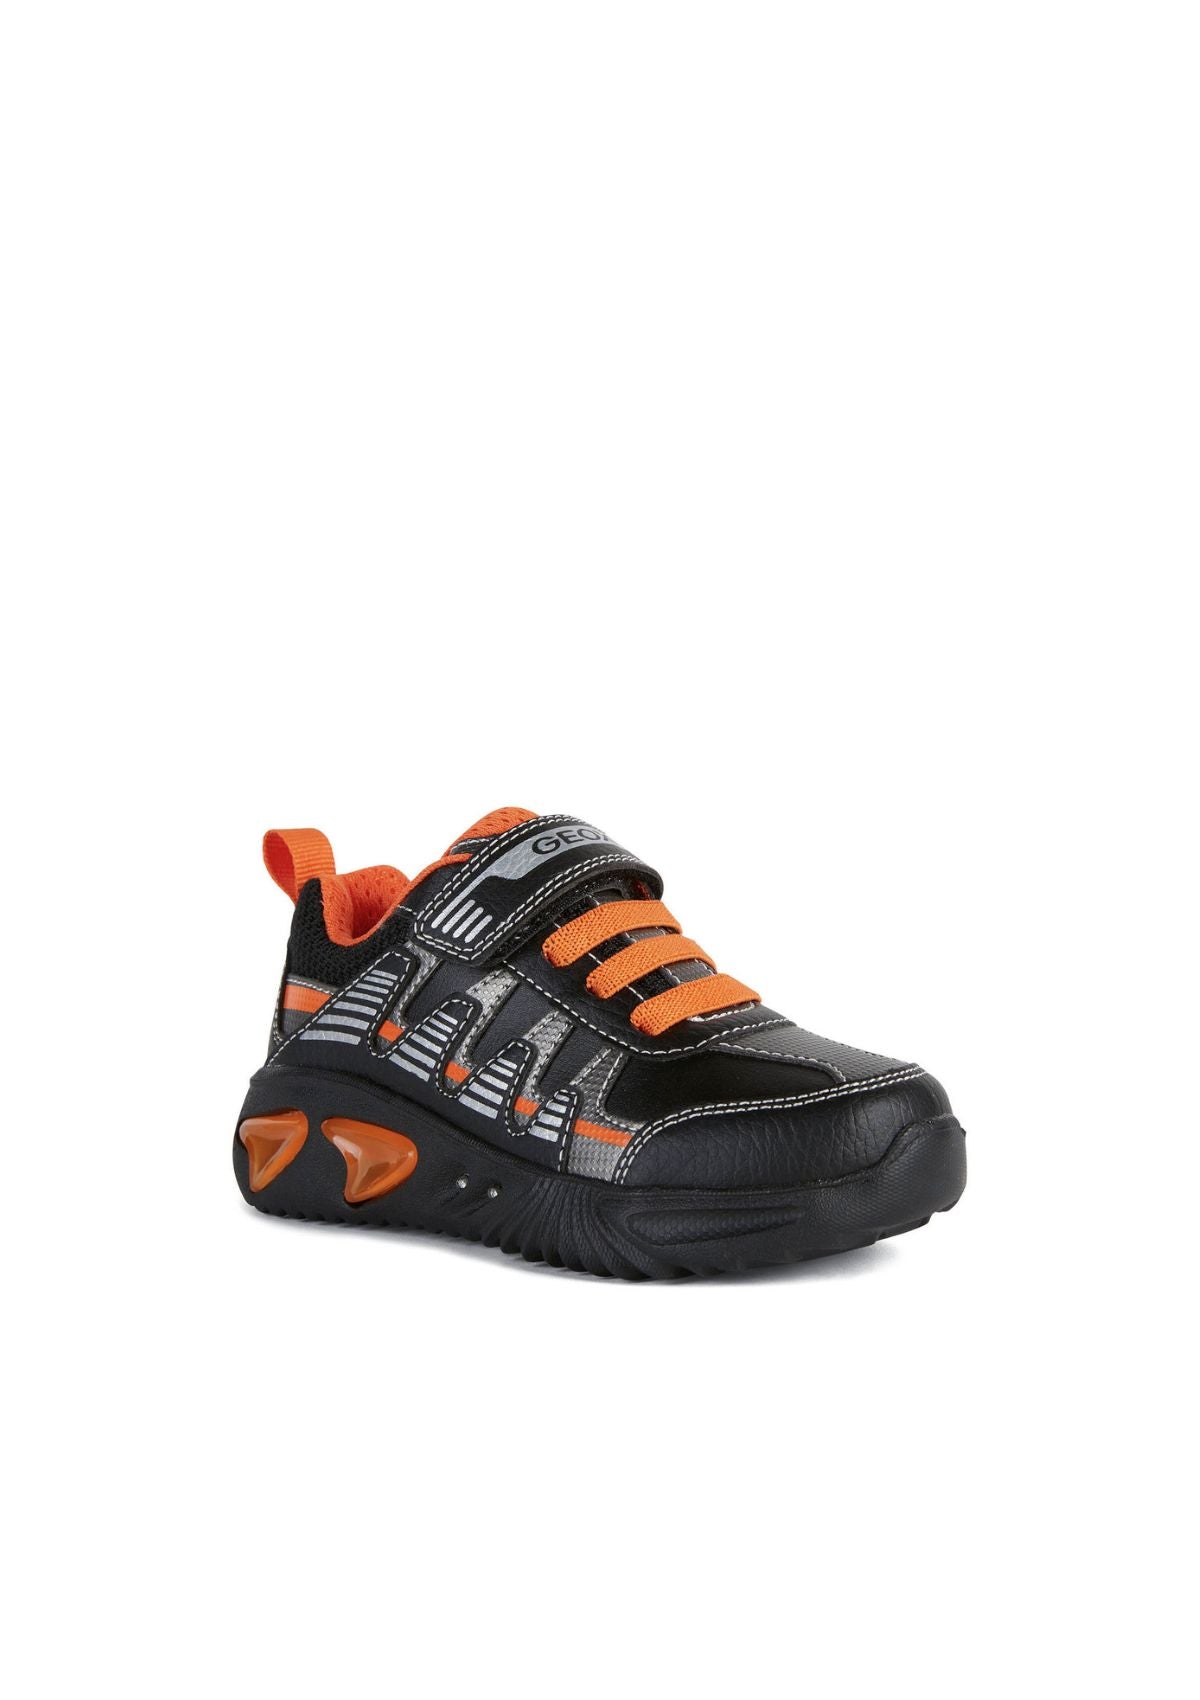 Geox Junior Boys Trainers ASSISTER Black Orange side front